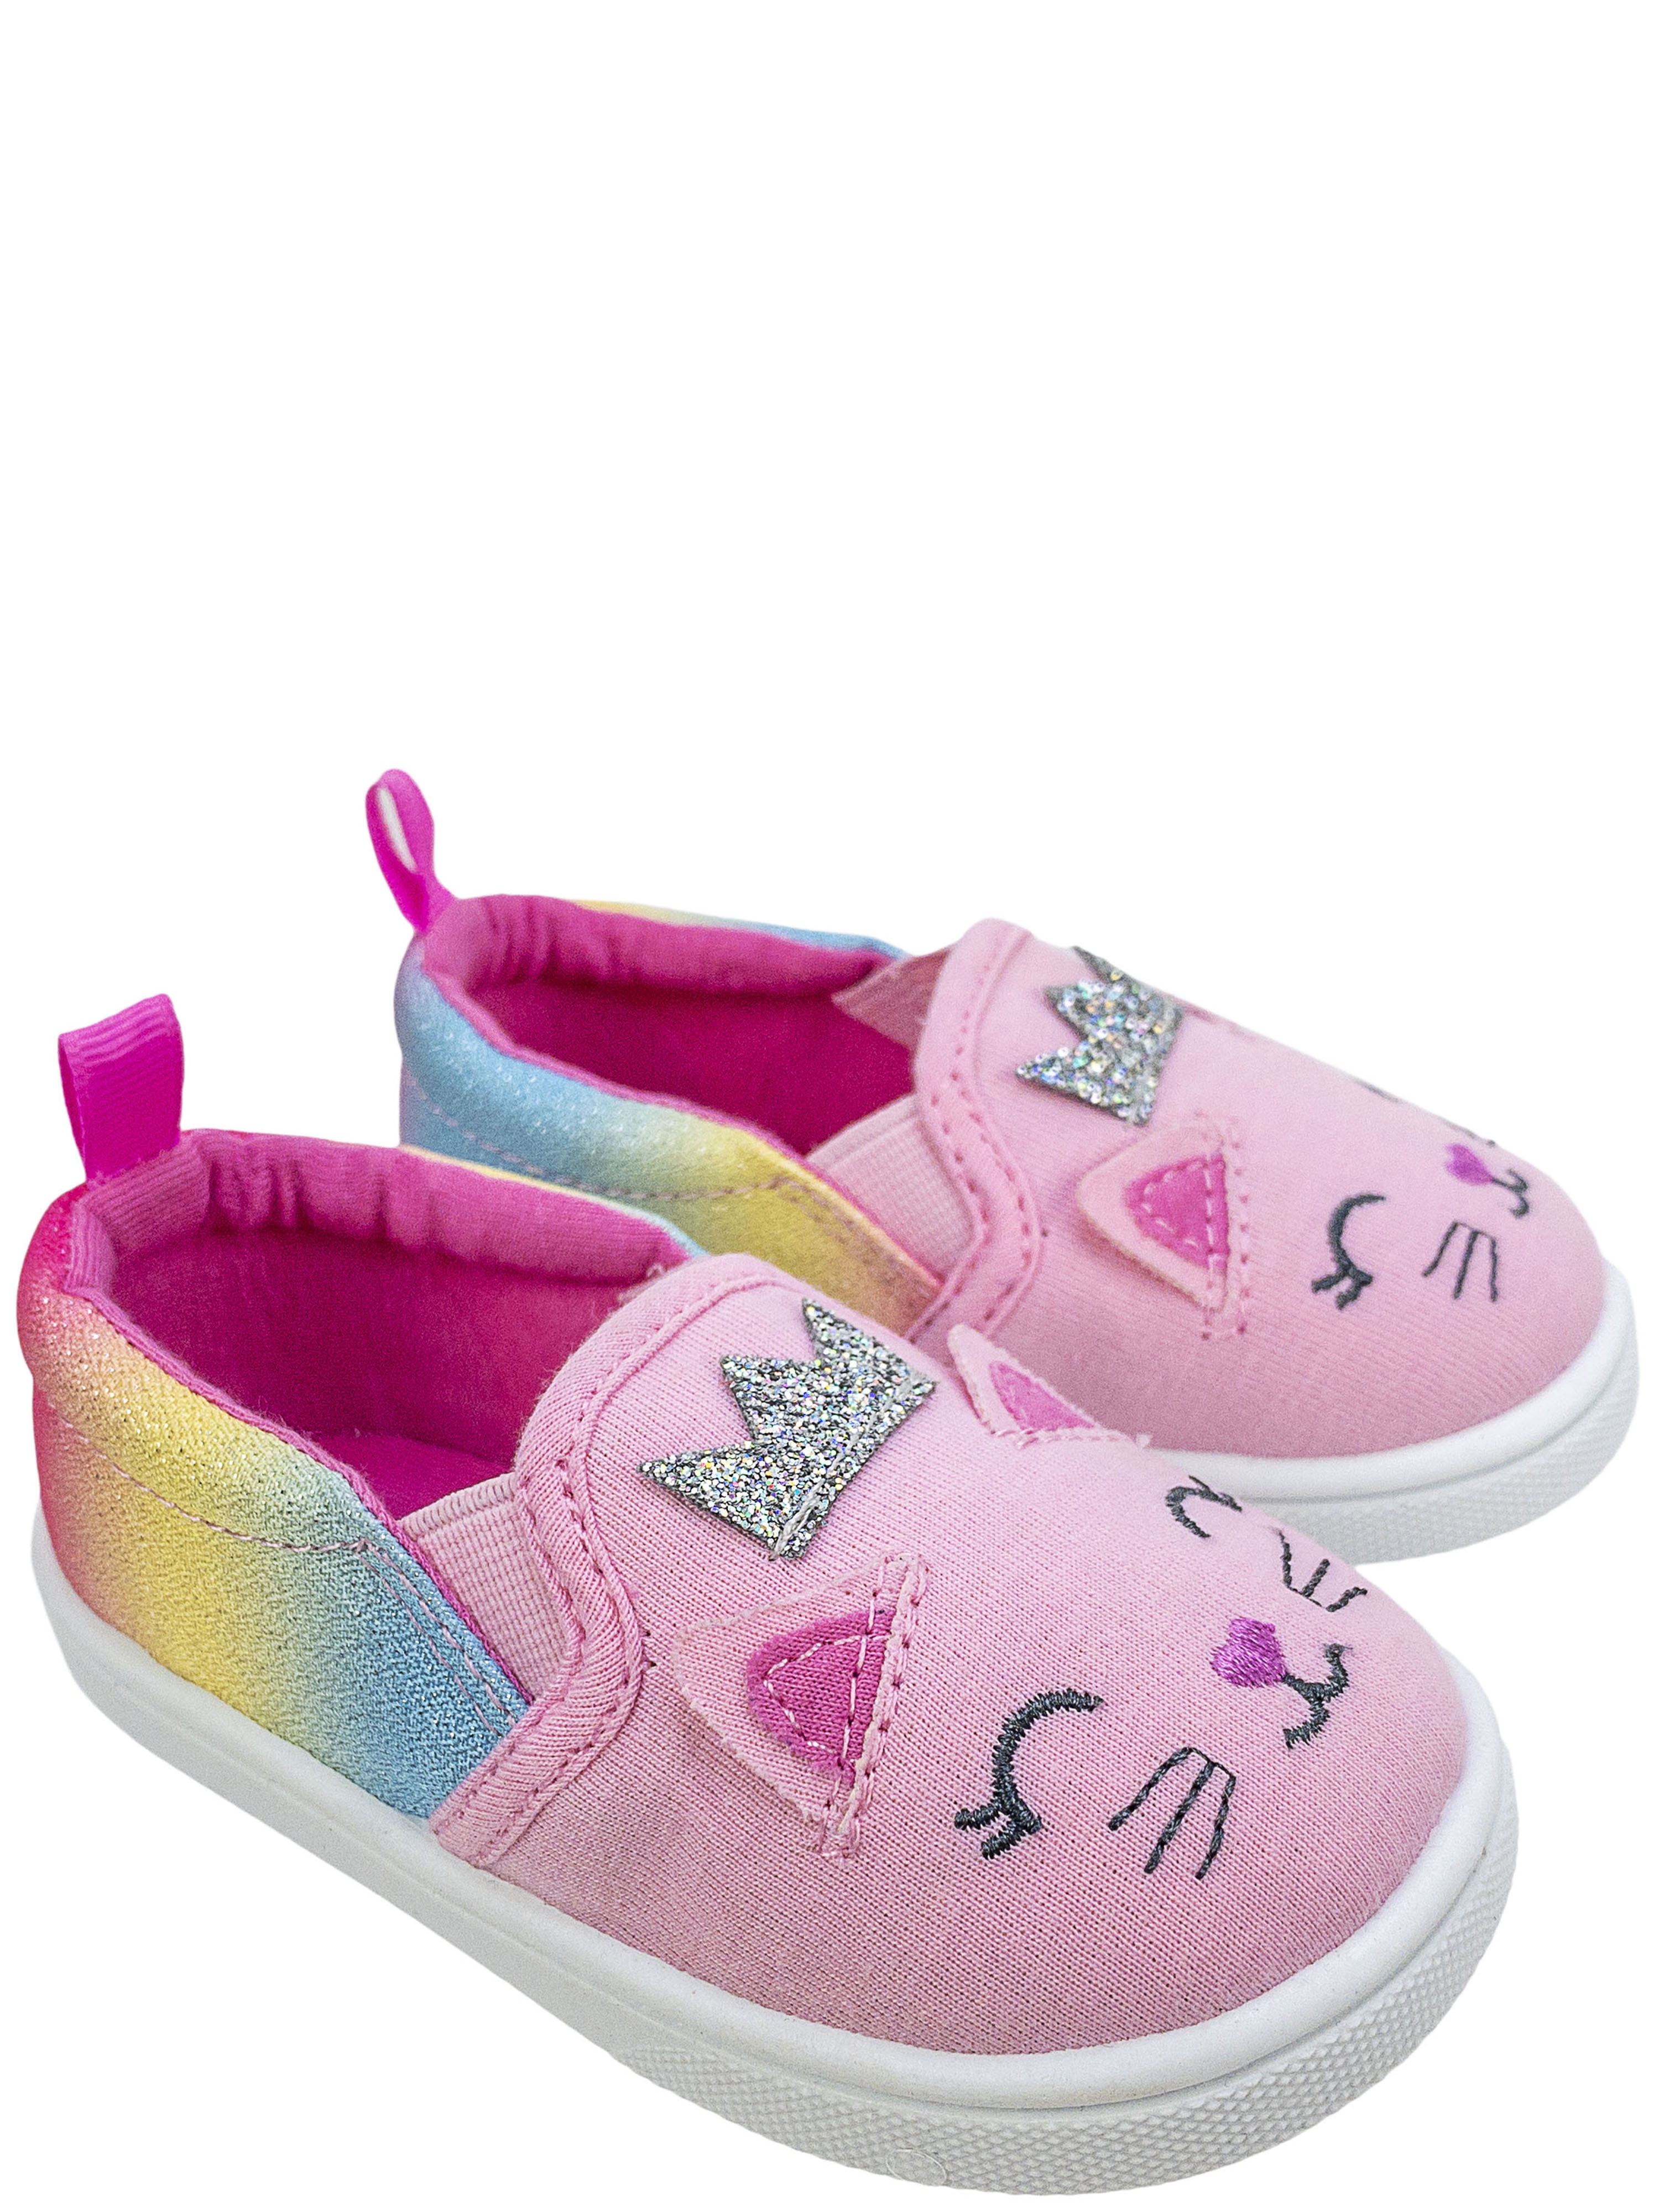 Wonder Nation Girls Slip On Canvas Shoes Gray Kitty Cat Size 6 NEW 